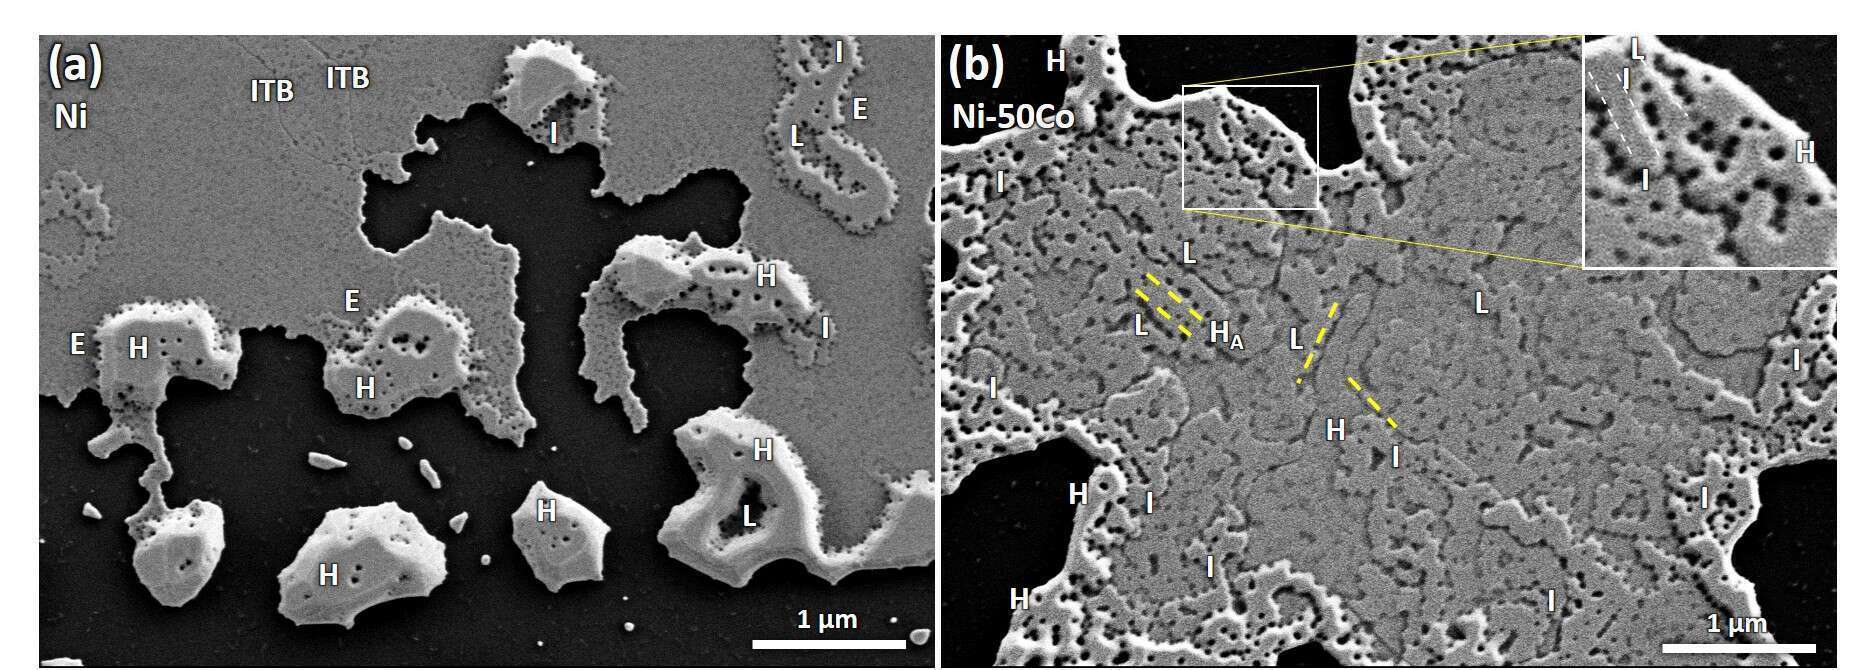 SEM micrographs of Ni and Ni-50Co after heat treatment at 750 °C revealing different stages of pore formation